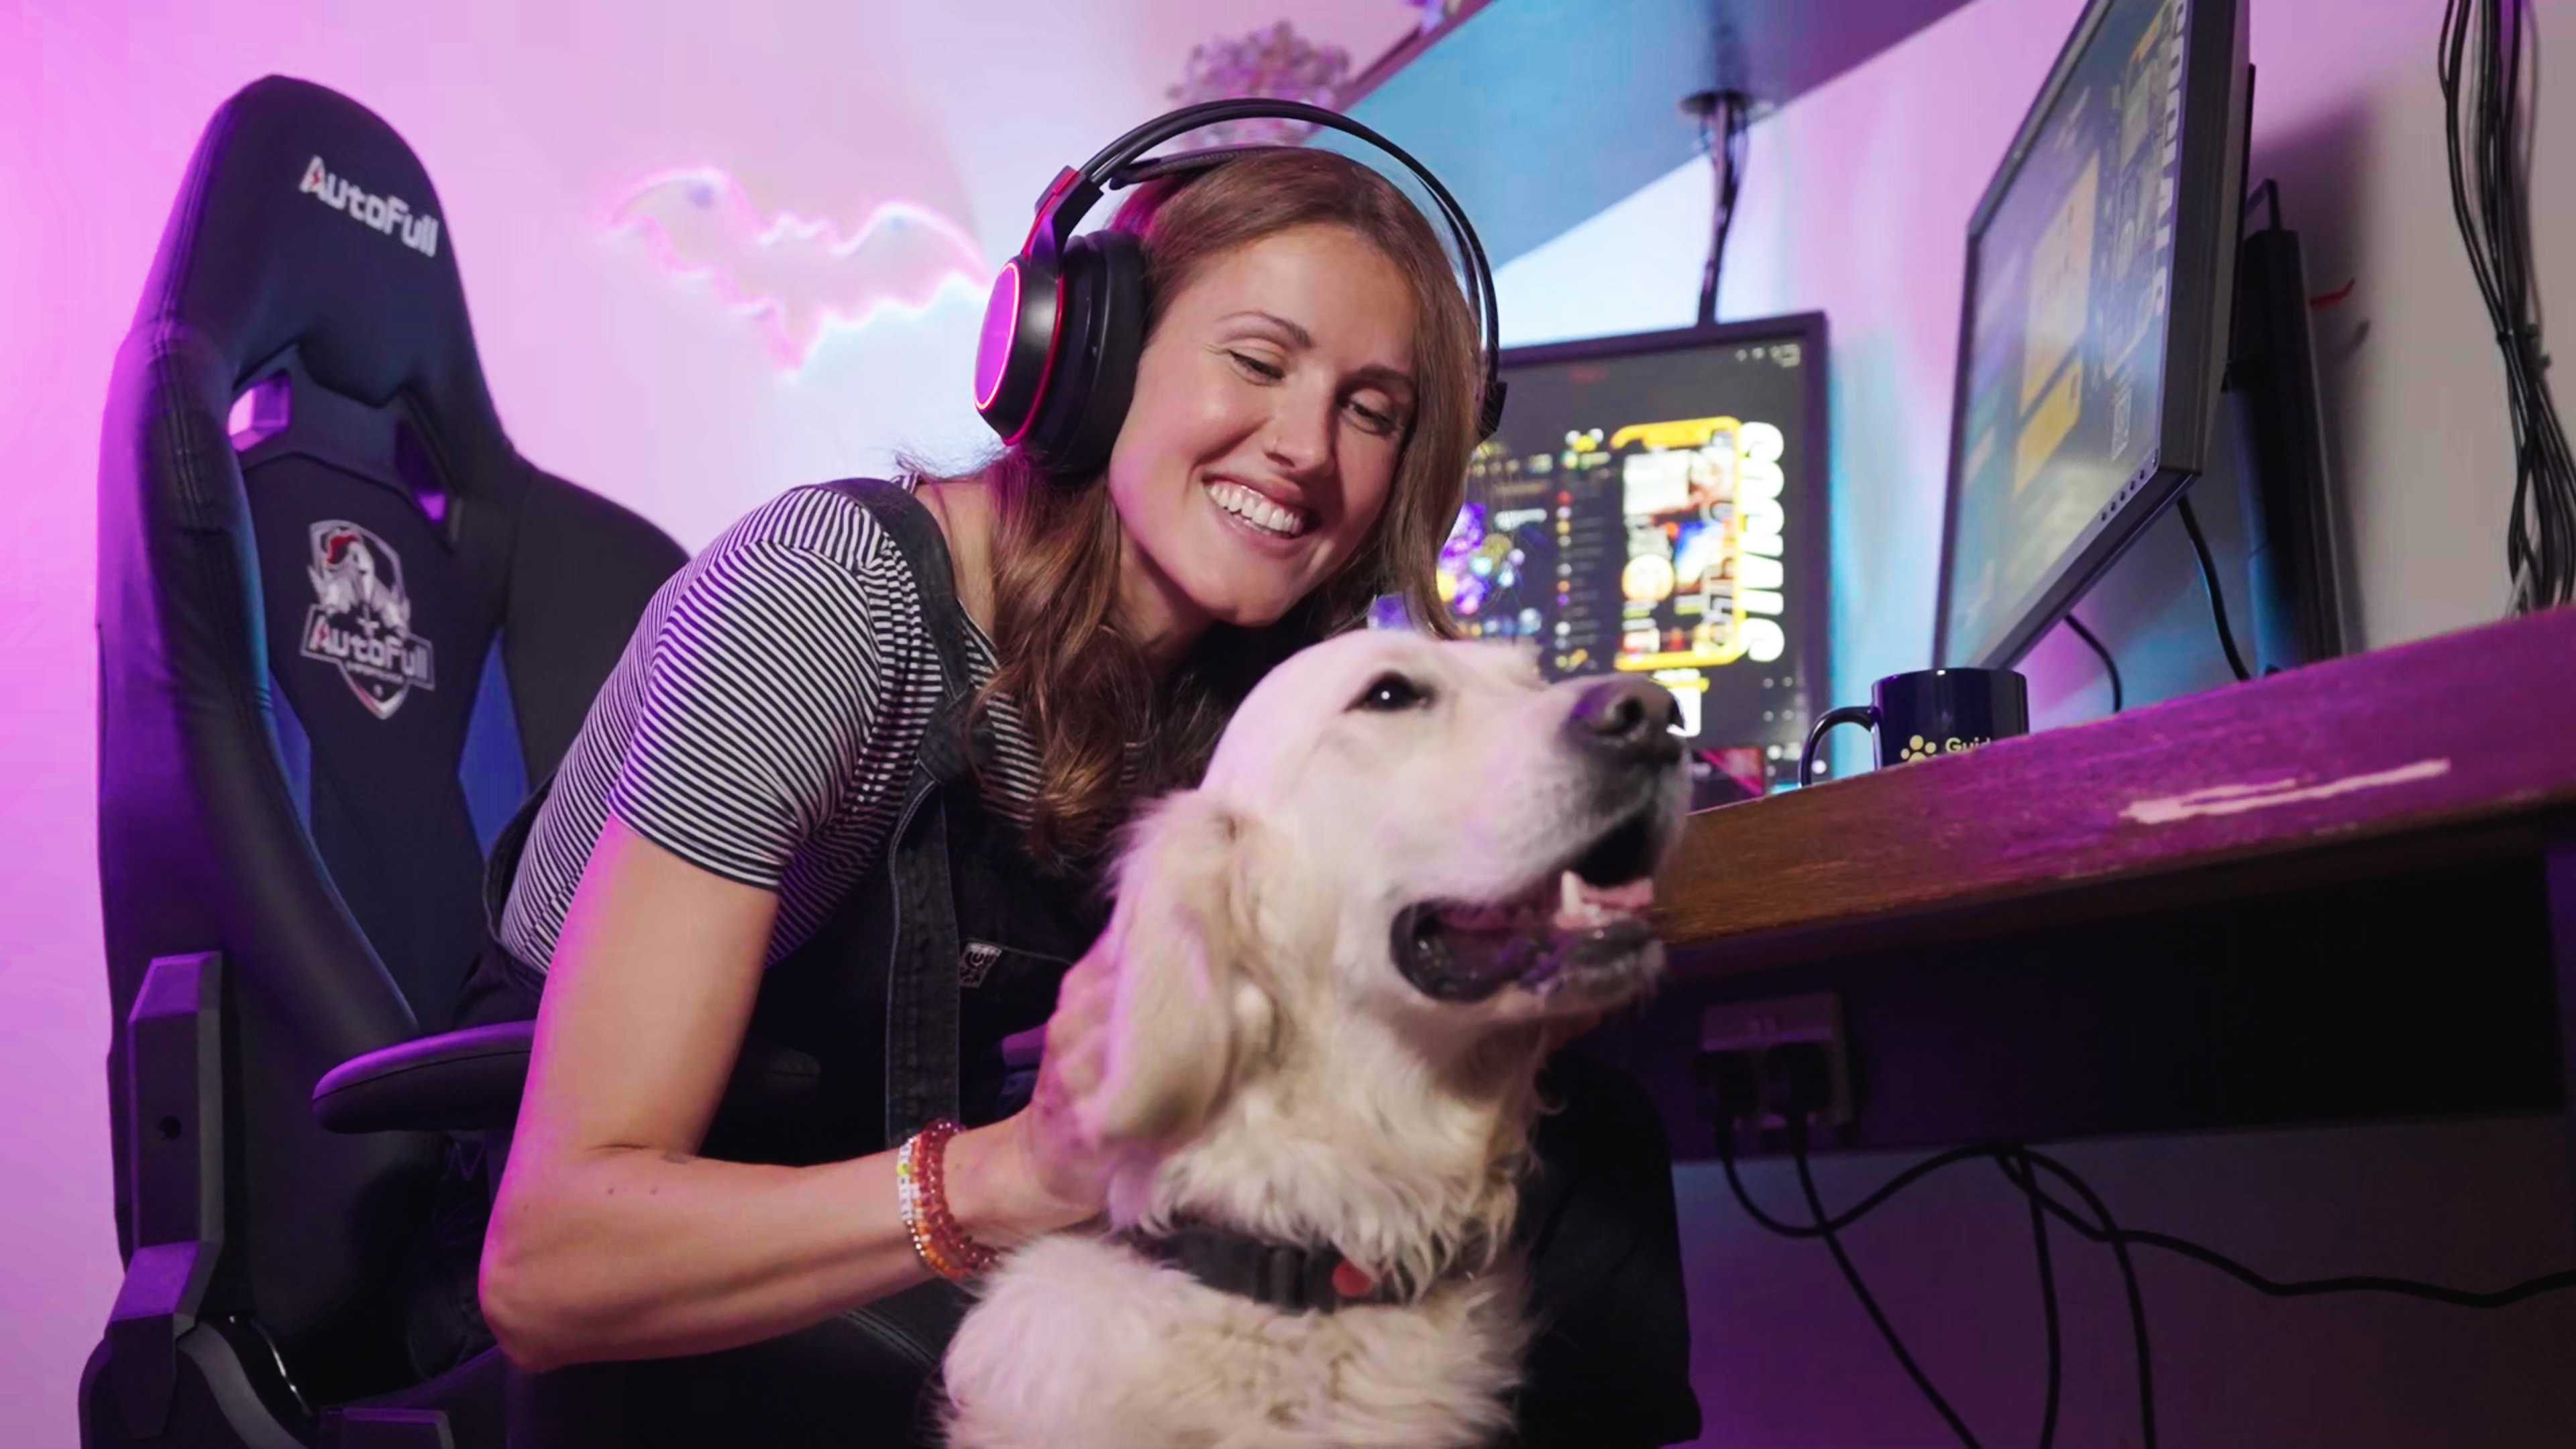 A person wearing headphones sat beside a gaming set-up and cuddling a yellow dog.